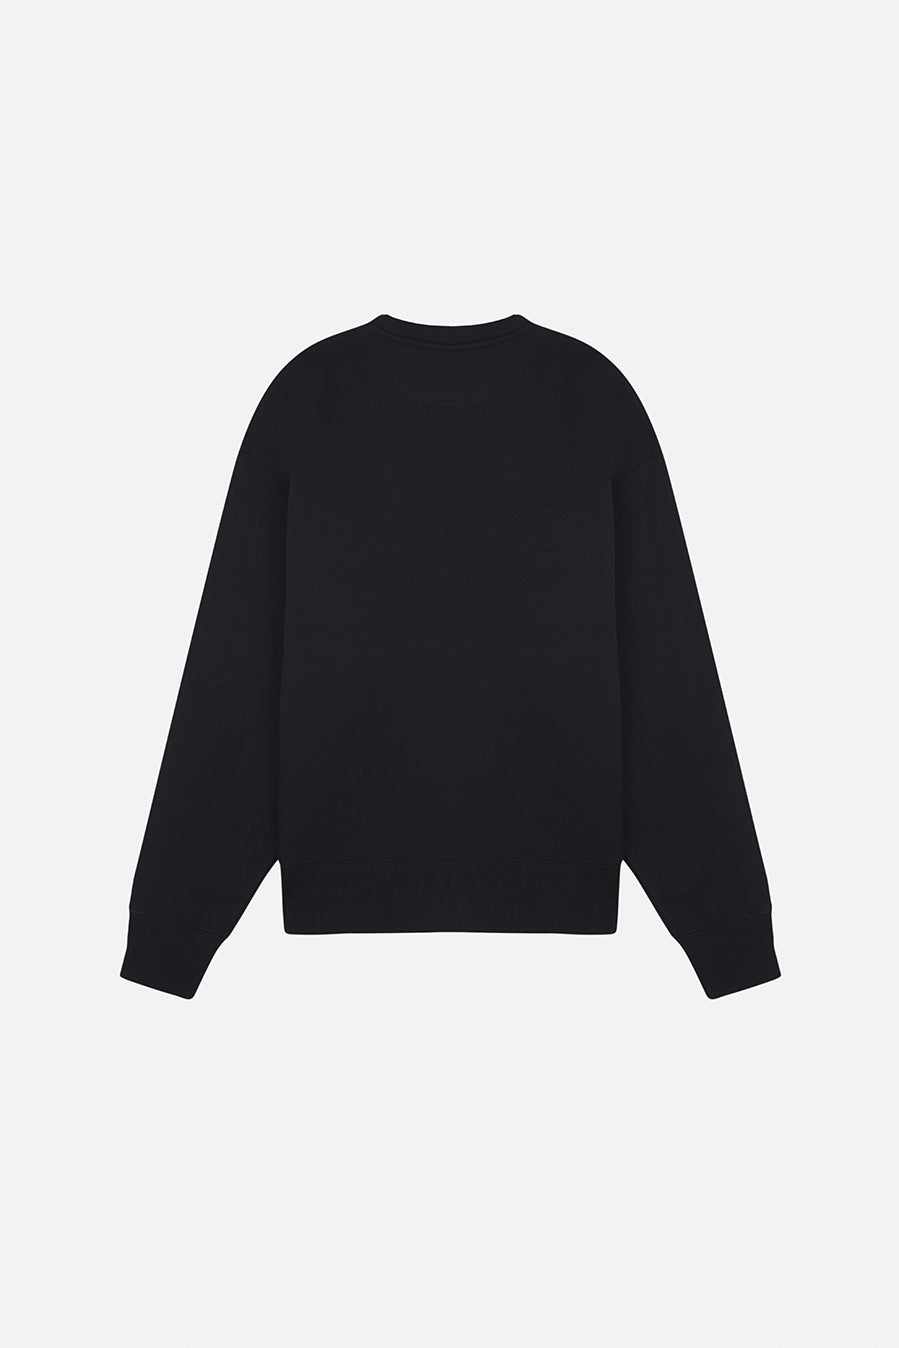 Sweater Black Without Limits